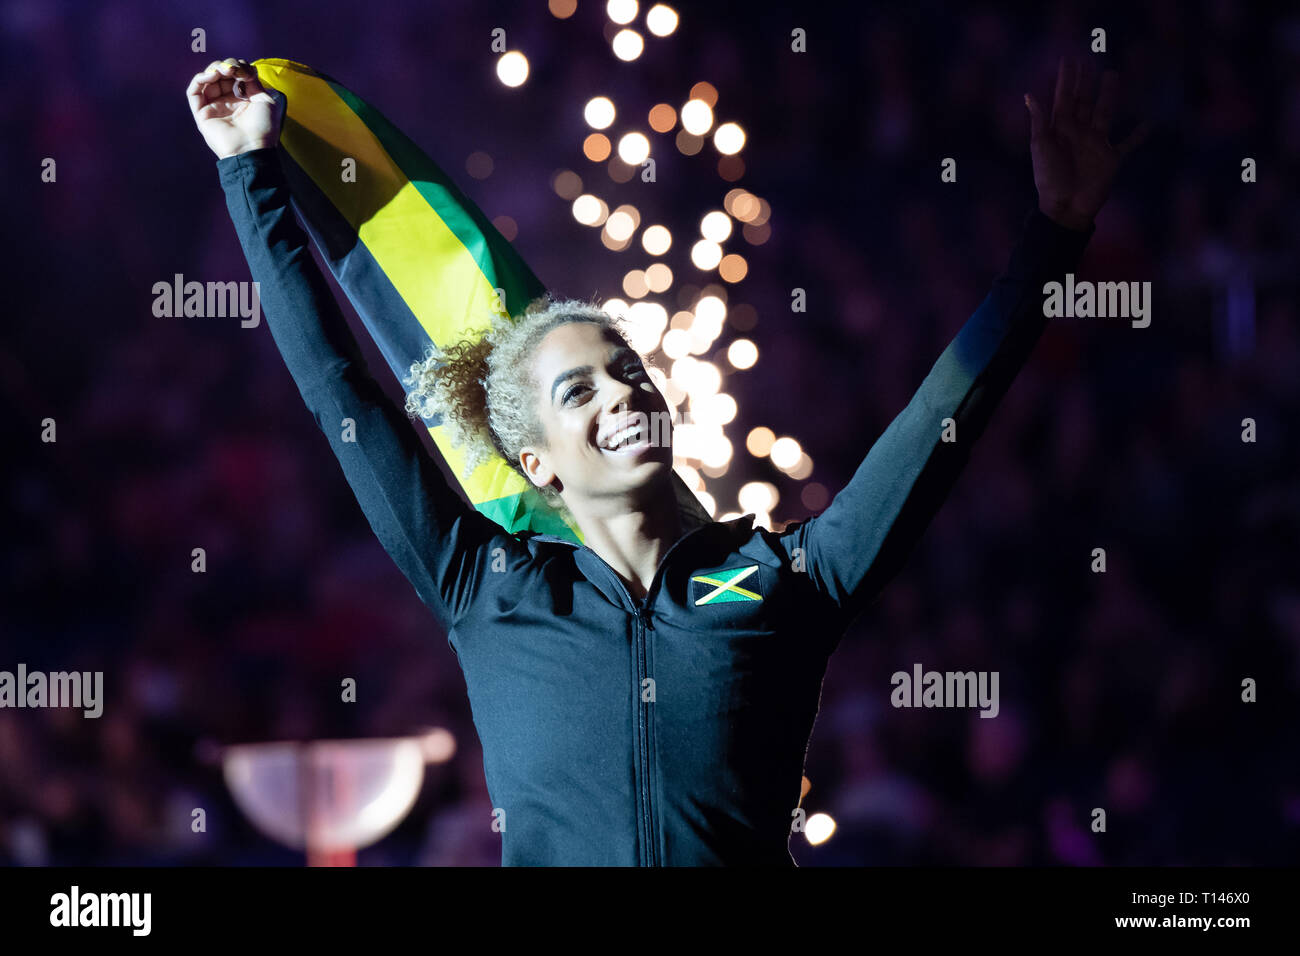 London, UK. 23rd March, 2019. Danusia Francis of Jamaica during the Matchroom Multisport presents the 2019 Superstars of Gymnastics at The O2 Arena on Saturday, 23 March 2019. LONDON ENGLAND. Credit: Taka G Wu/Alamy News Stock Photo